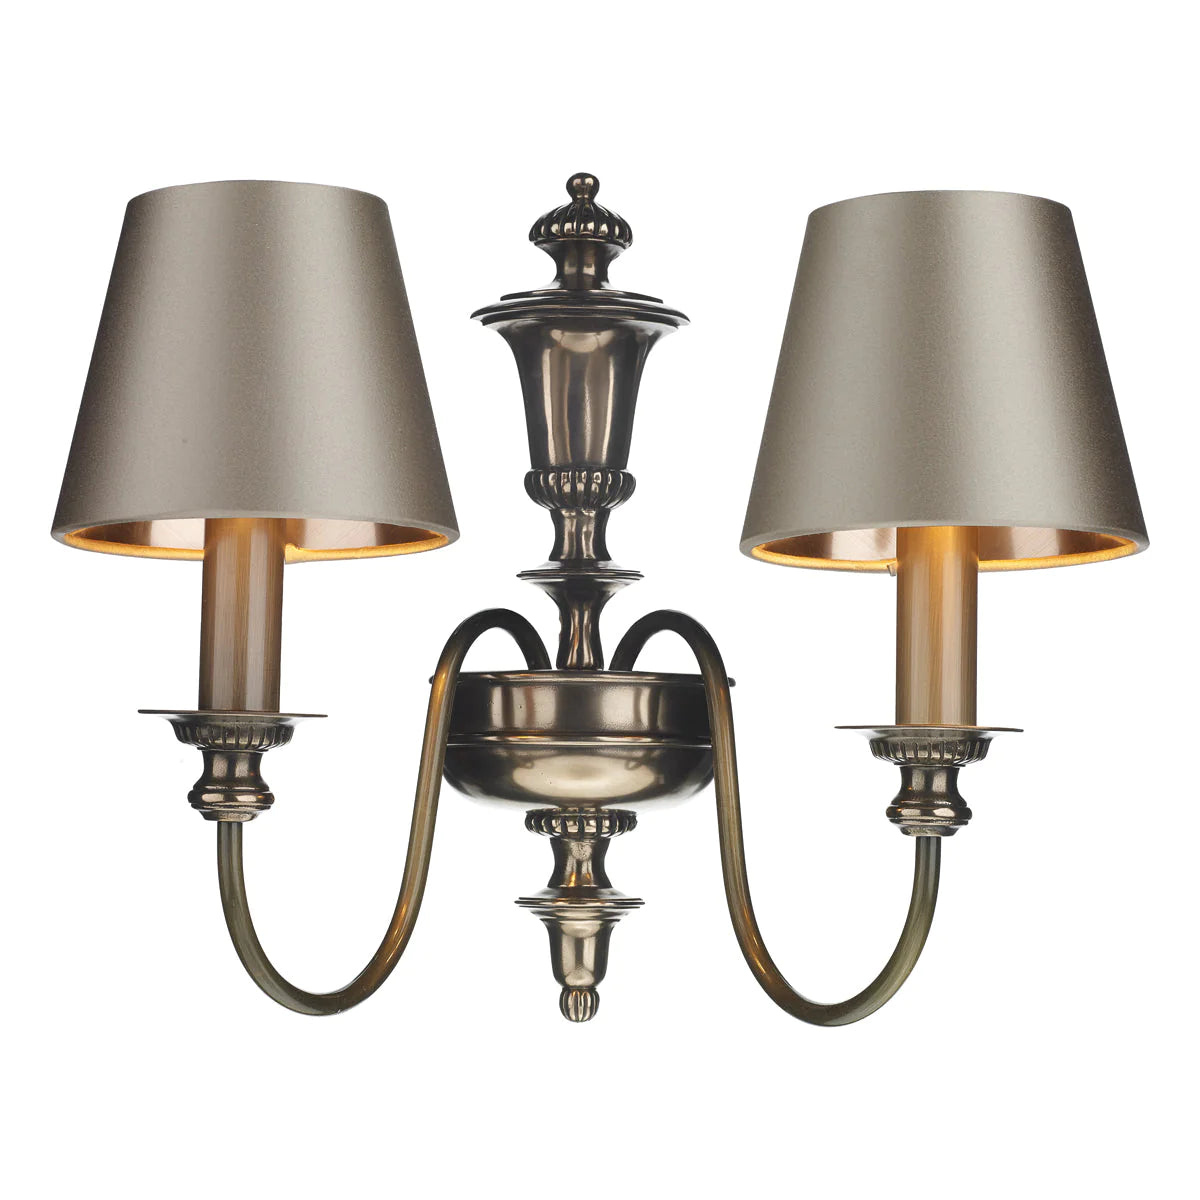  David Hunt Lighting Dickens Double Wall Light Bronze collection